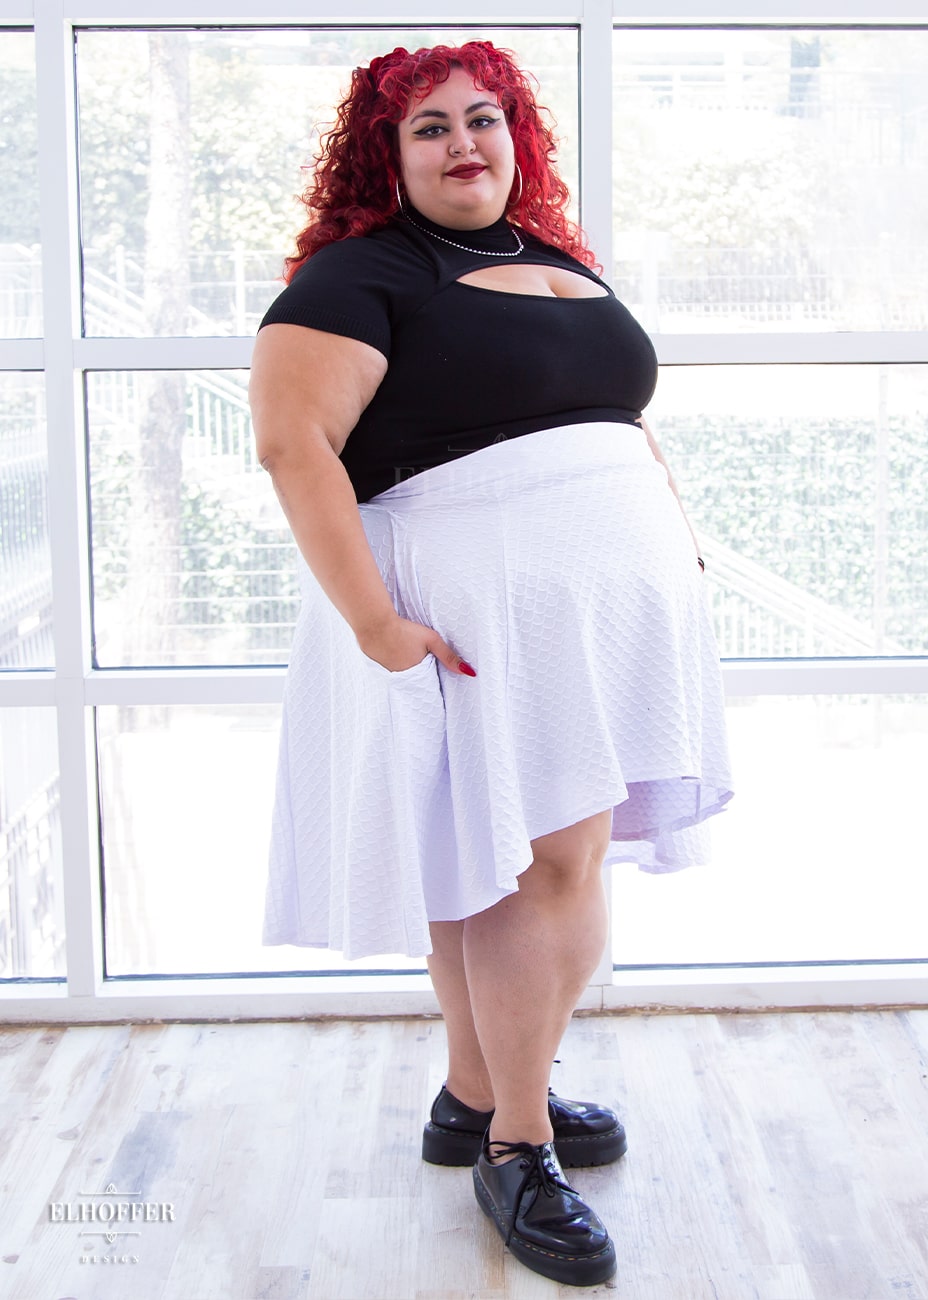 Victoria is modeling the Production 4XL. She has a 64” Chest, 60” Waist, 64” Hips, and is 5’5”.